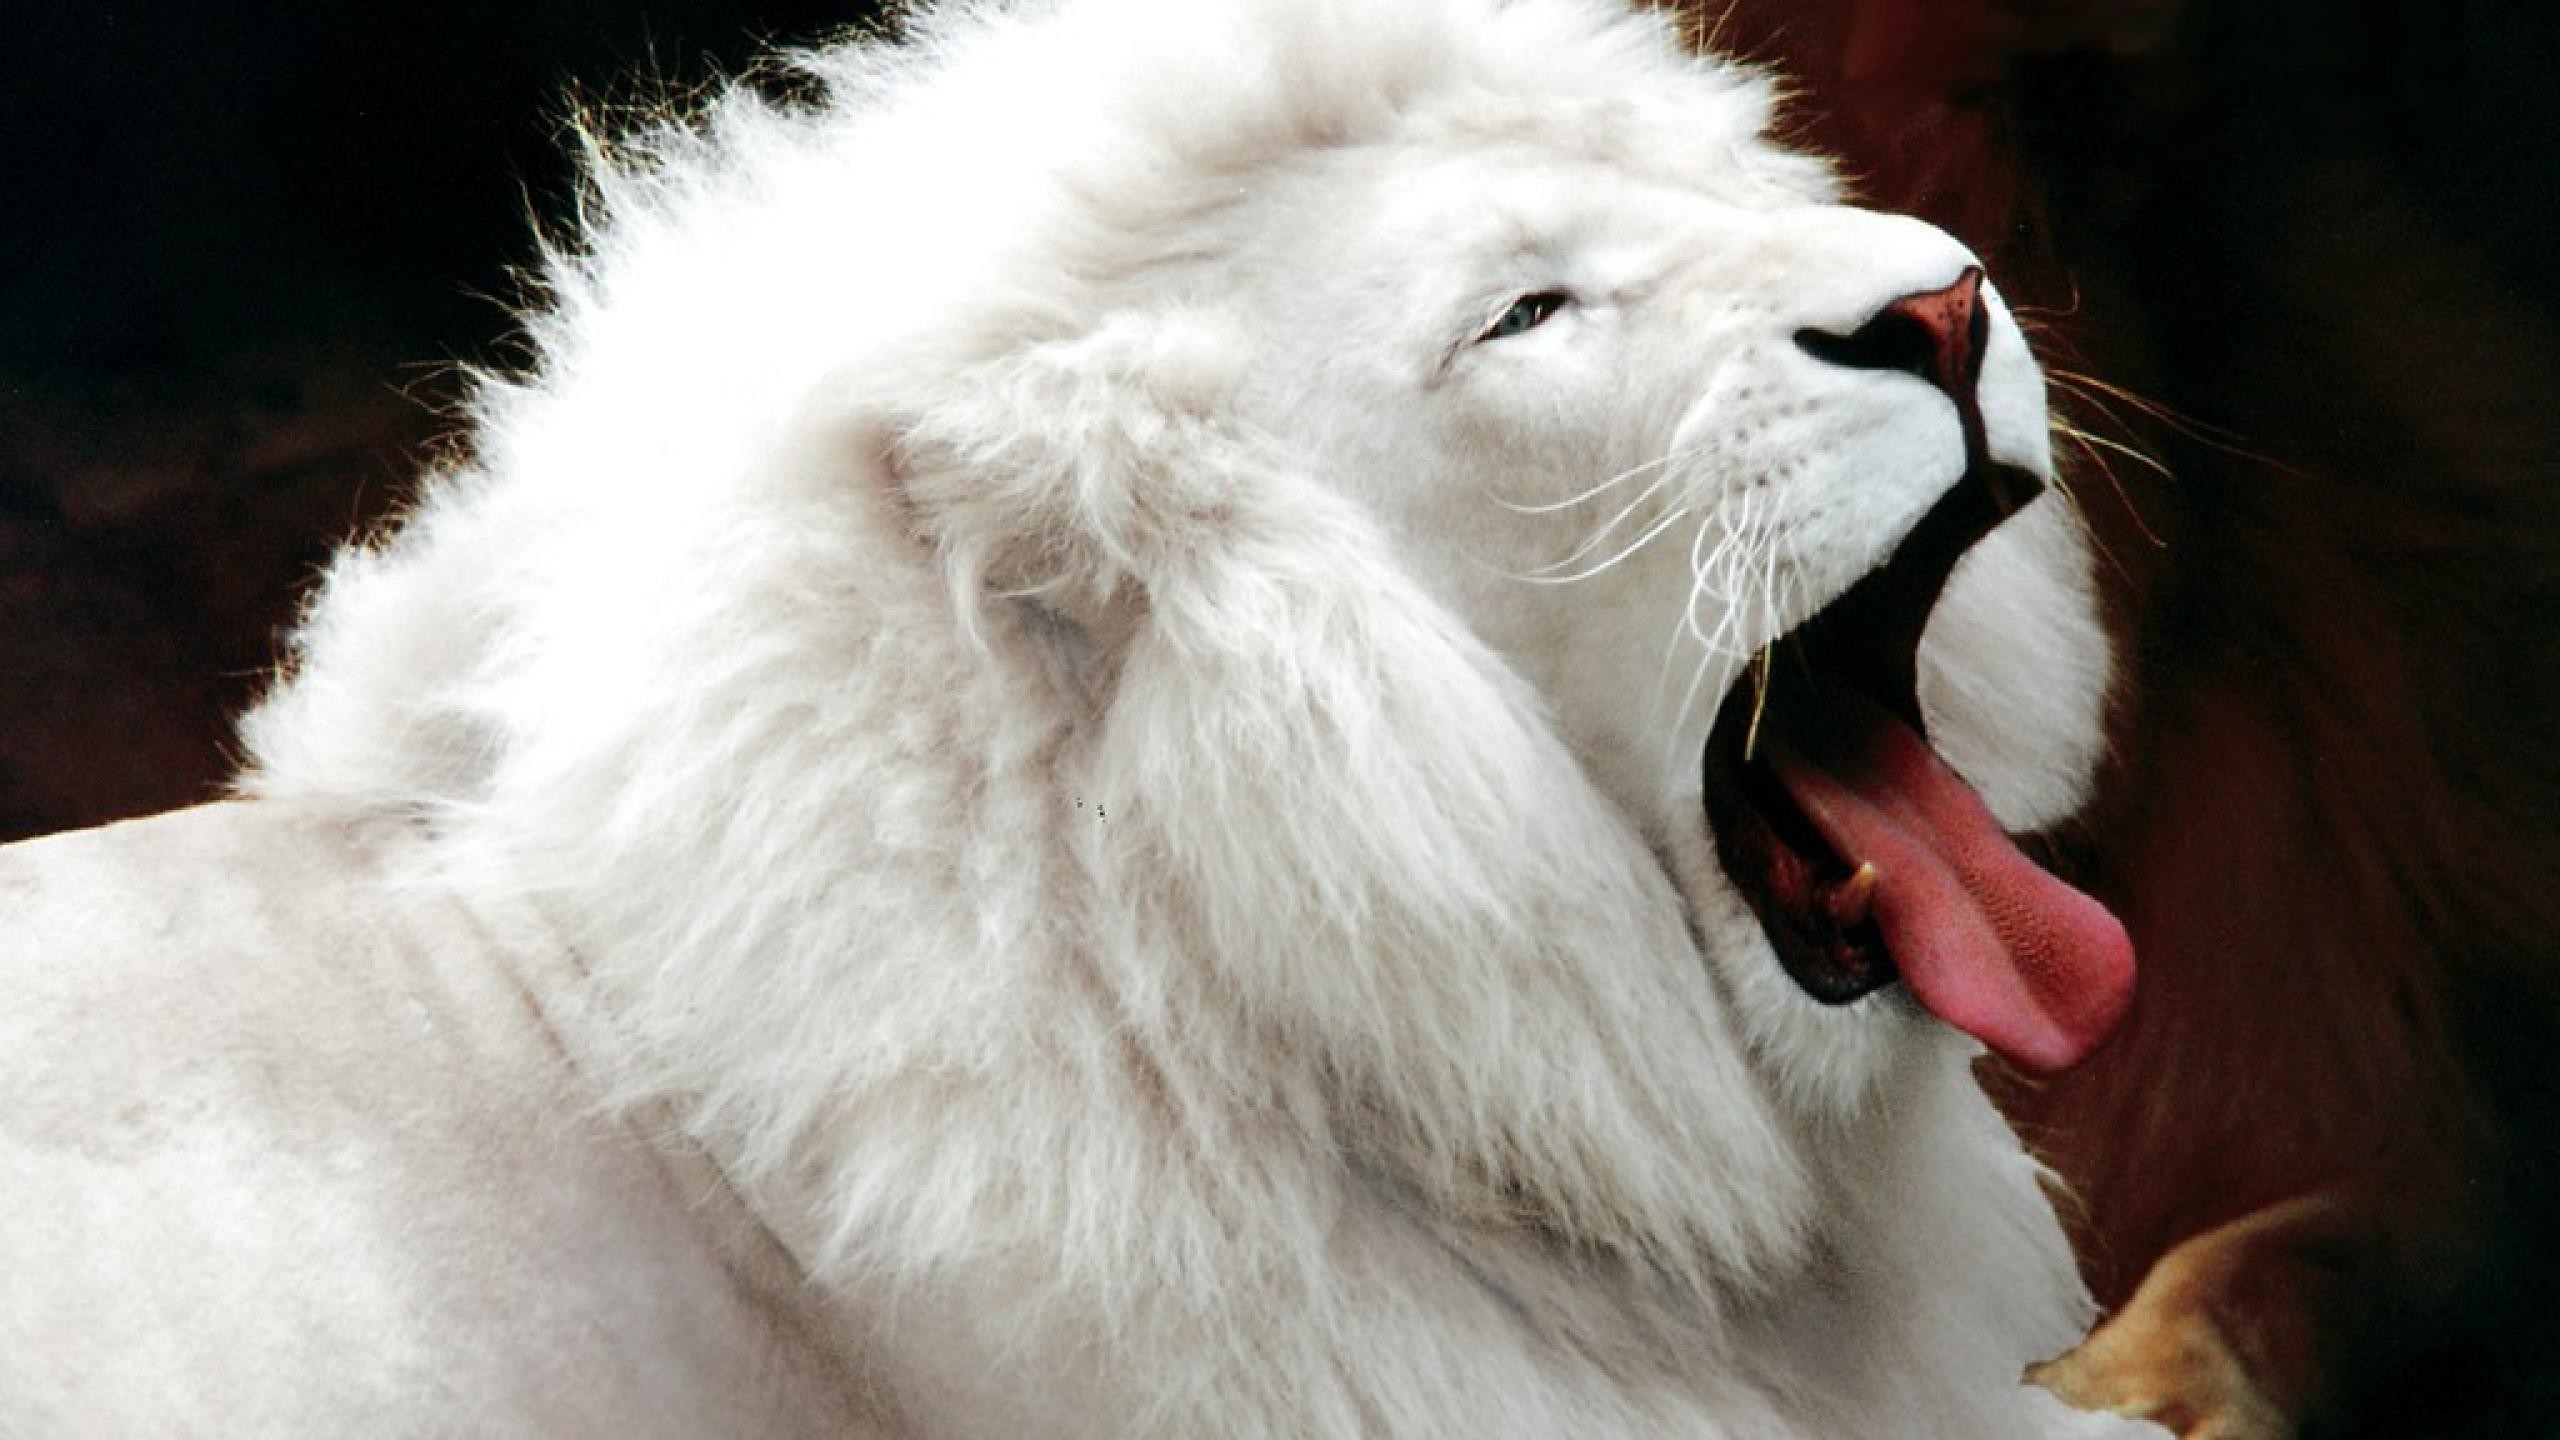 2560x1440 free Animals Lions wallpaper, resolution : 1920 x tags: Animals, Lions,  White, Lions.